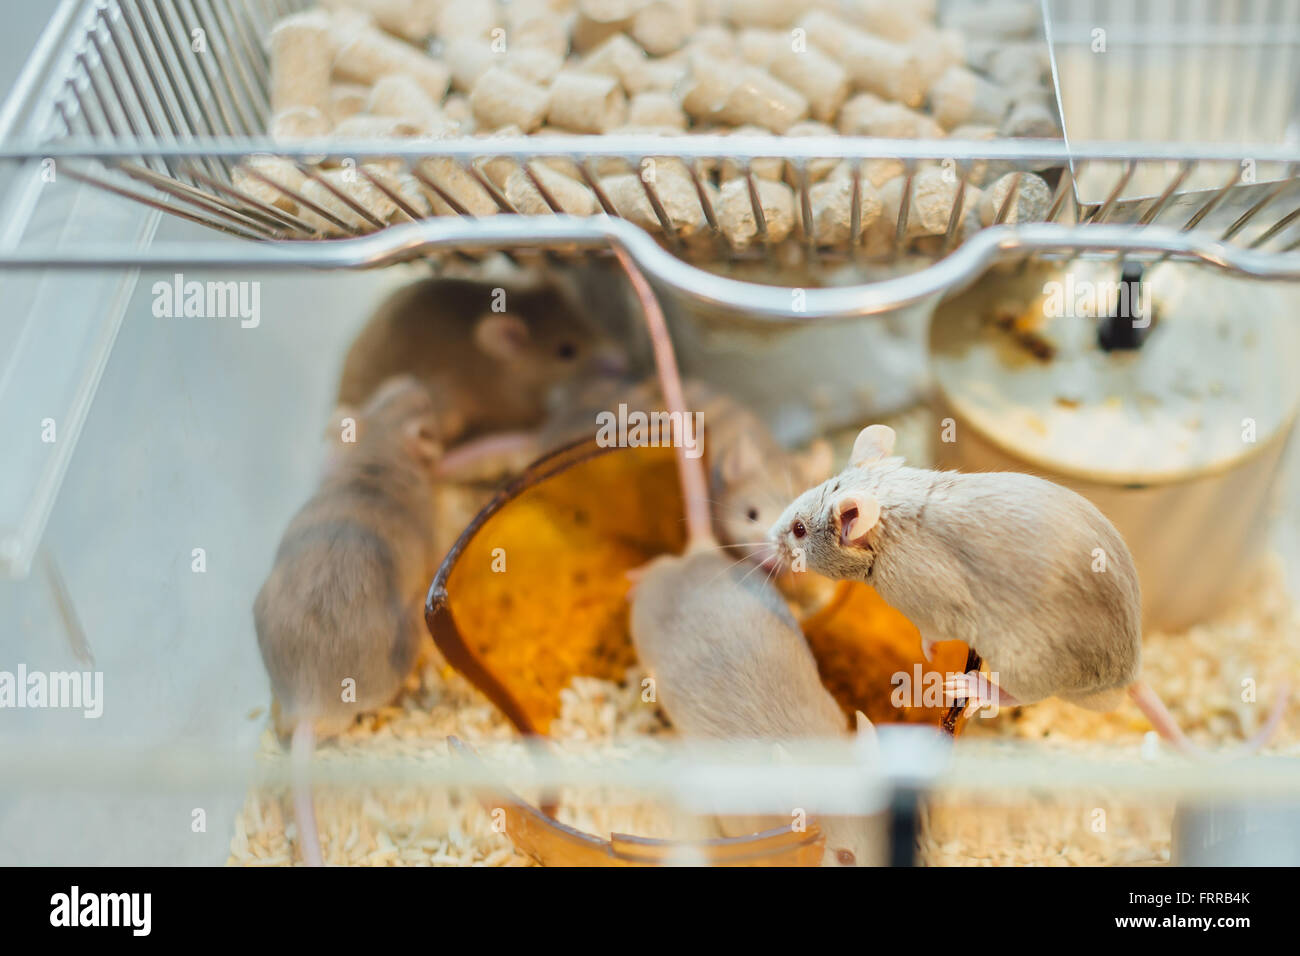 https://c8.alamy.com/comp/FRRB4K/one-lab-mouse-watching-other-mice-play-in-home-cage-FRRB4K.jpg